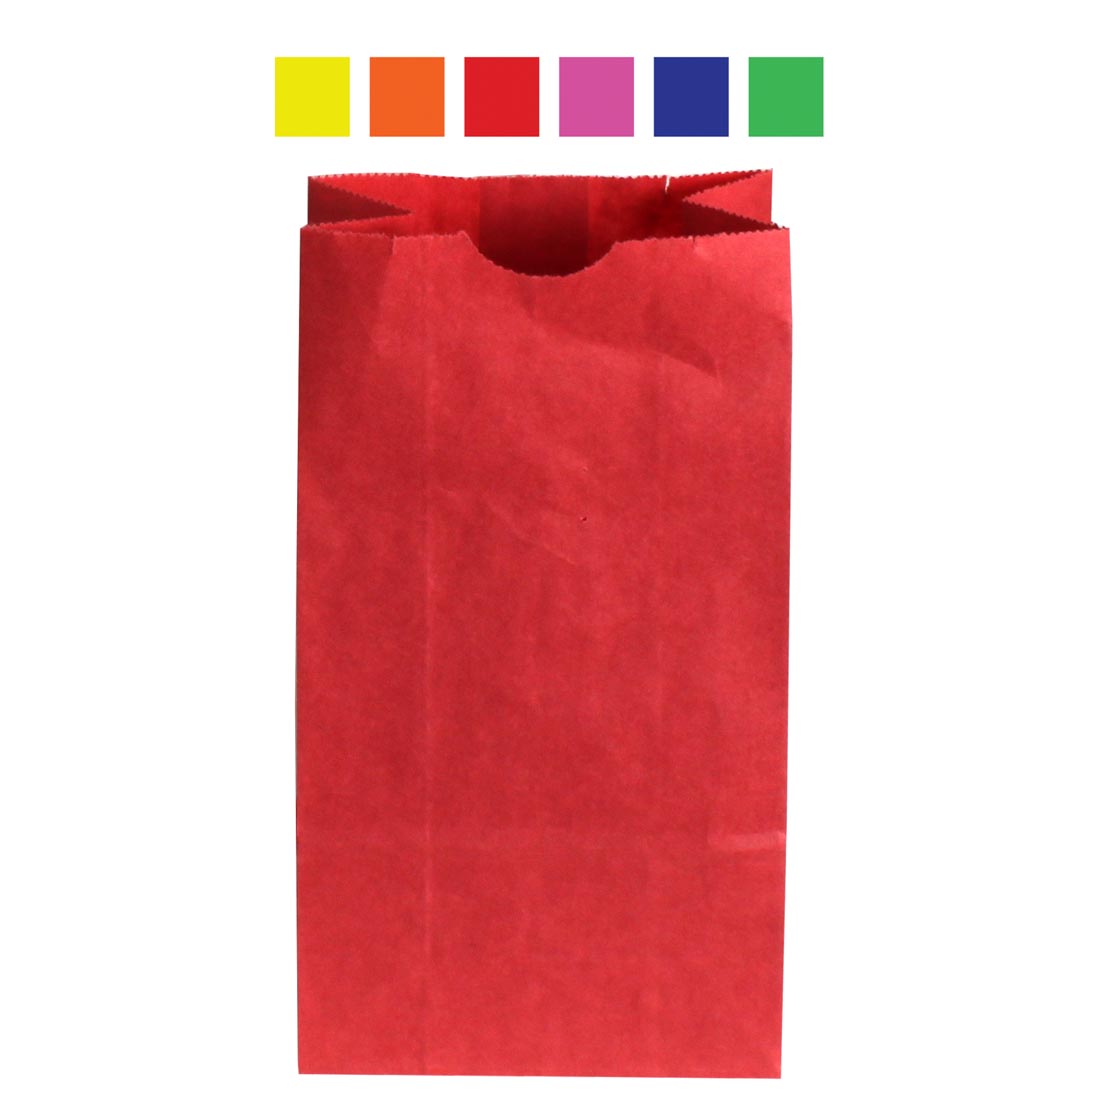 Red Mini Rainbow Kraft Bag with six color swatches above